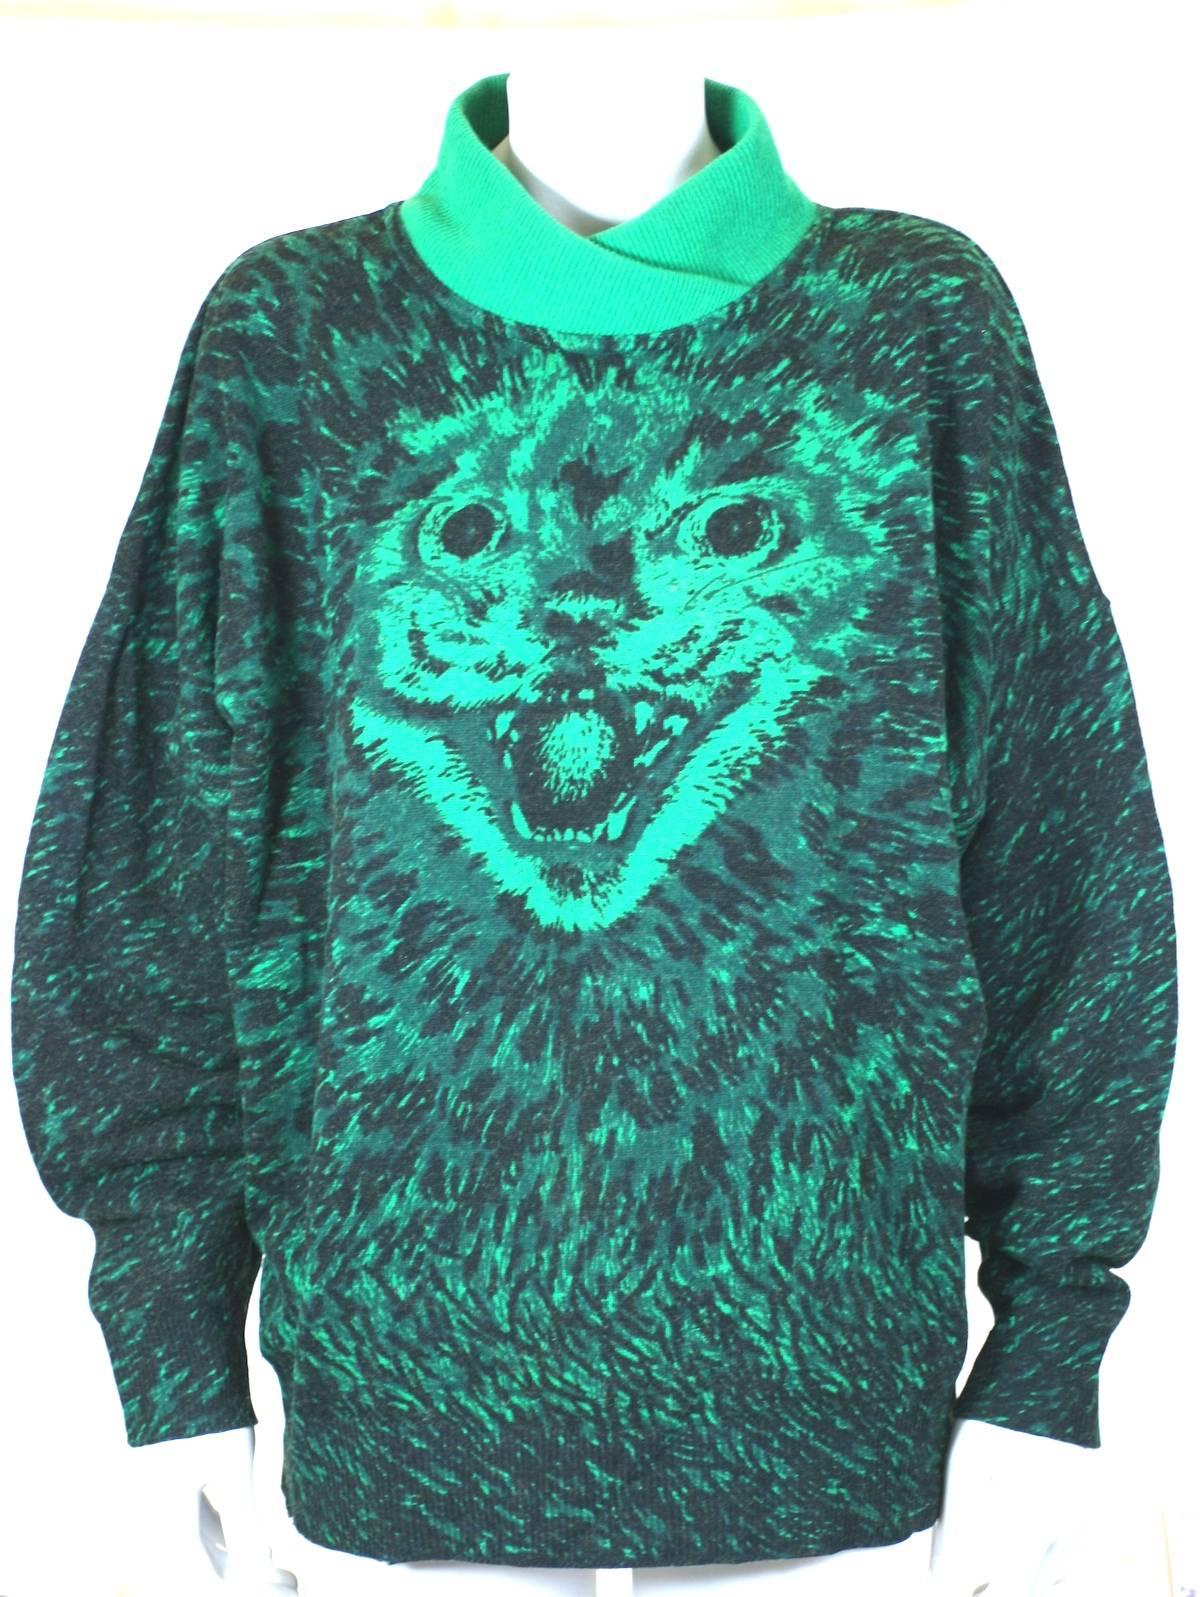 Krizia Scary Cat Sweater in odd greens with black highlights, Collectable Animal Series. Size 42, Length 26